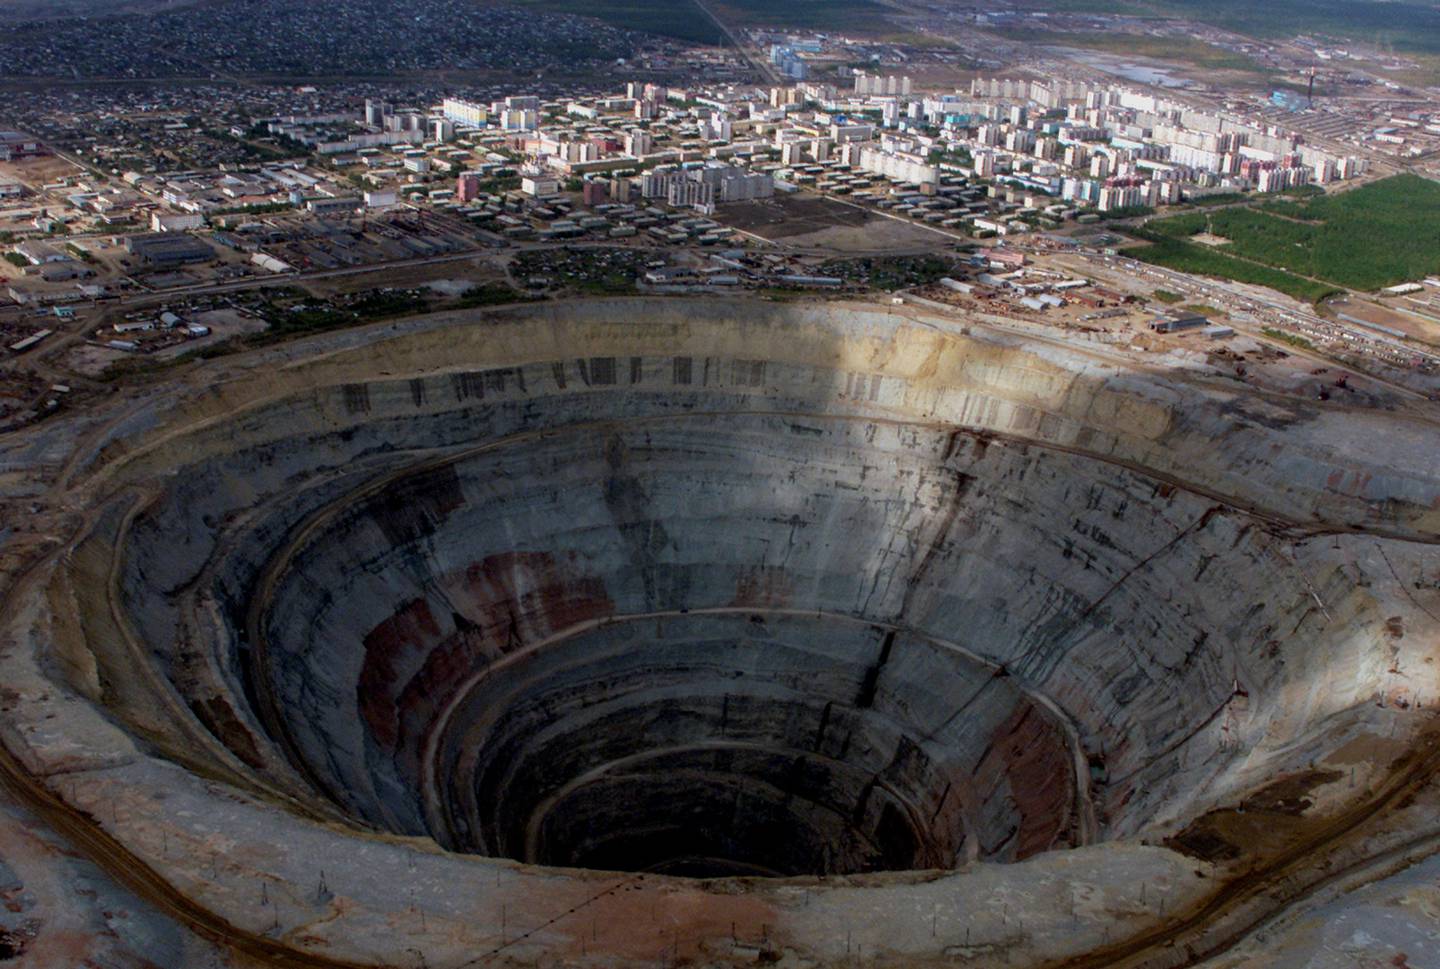 FILE PHOTO: Picture shows a general view of one of Russia's biggest kimberlite pipes, Mir, near the town of Mirny in the Republic of Sakha (Yakutia), Russia August 30, 2001. REUTERS/Sergei Karpukhin/File Photo